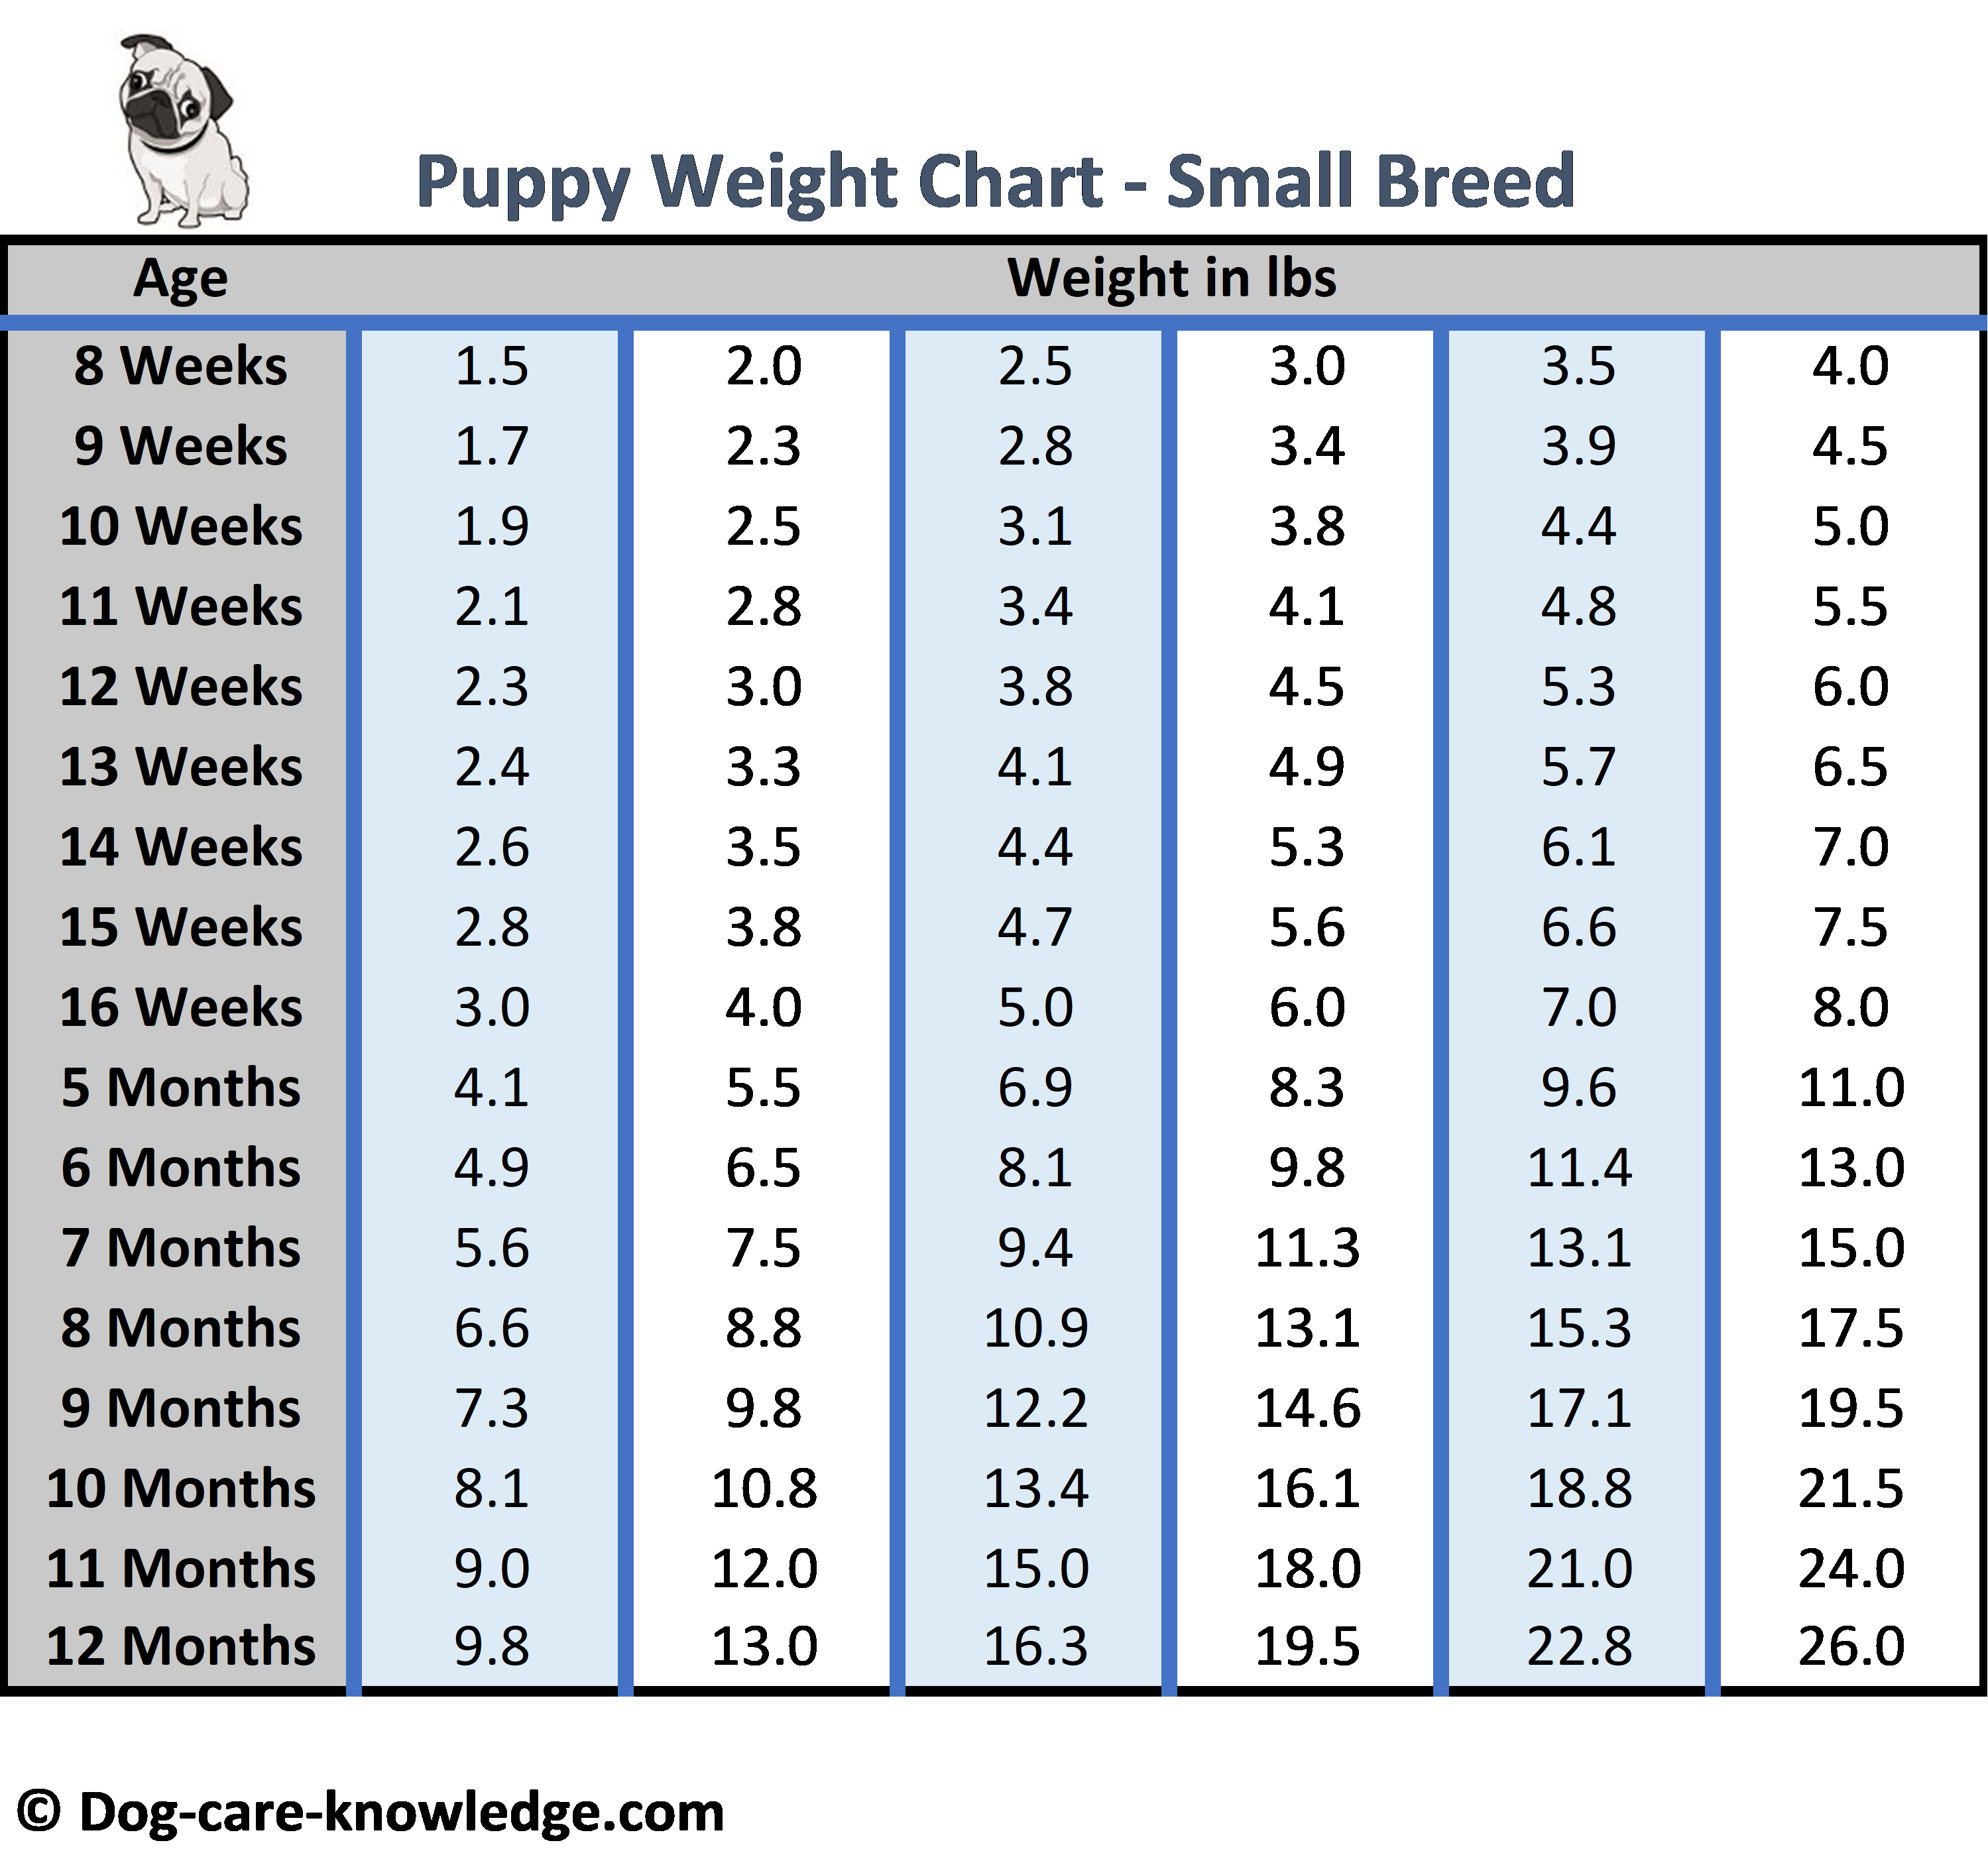 https://www.dog-care-knowledge.com/images/puppy-weight-chart-small-Jan2023-C.png